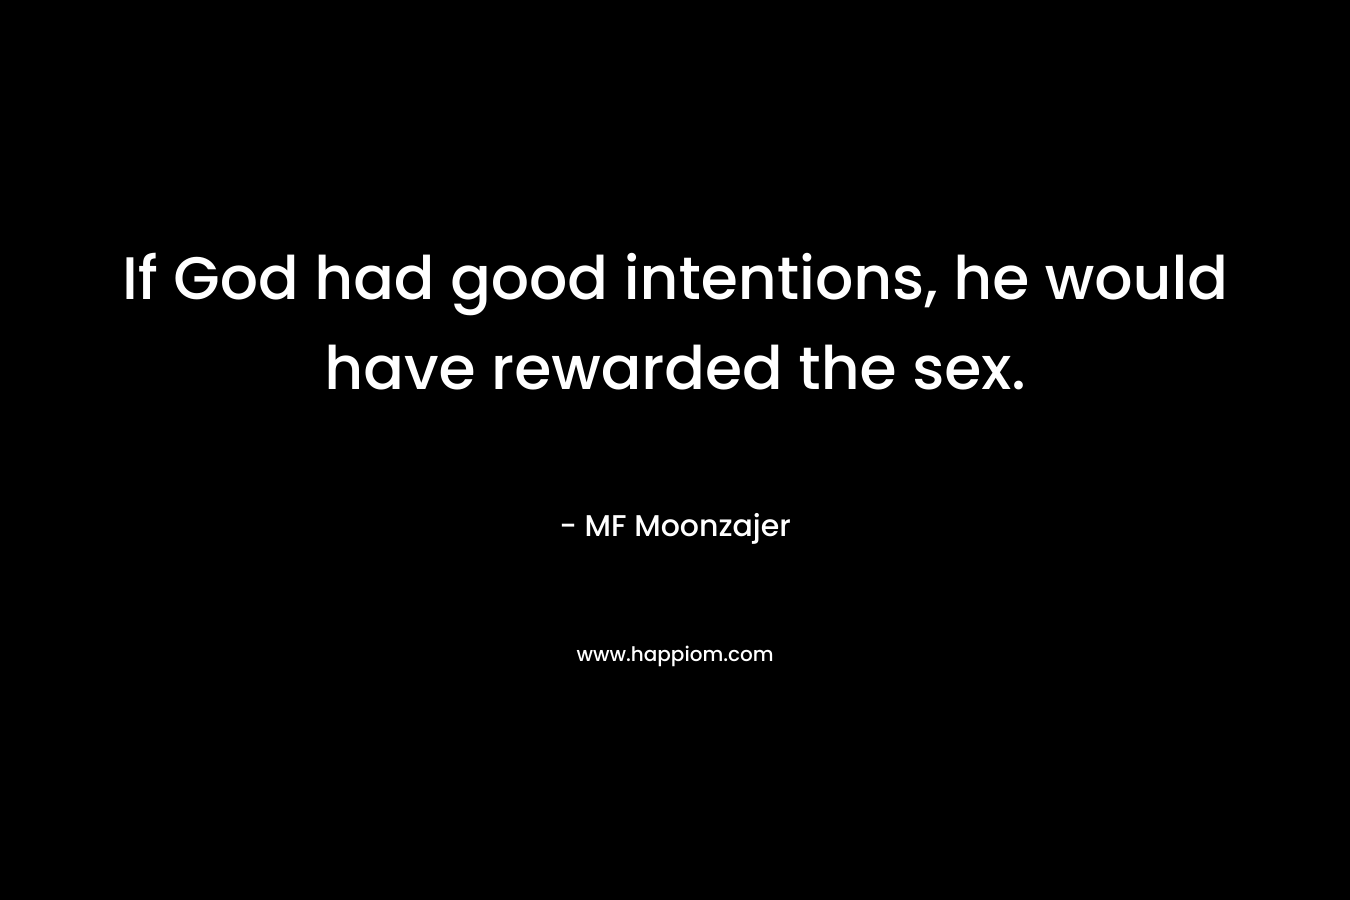 If God had good intentions, he would have rewarded the sex.